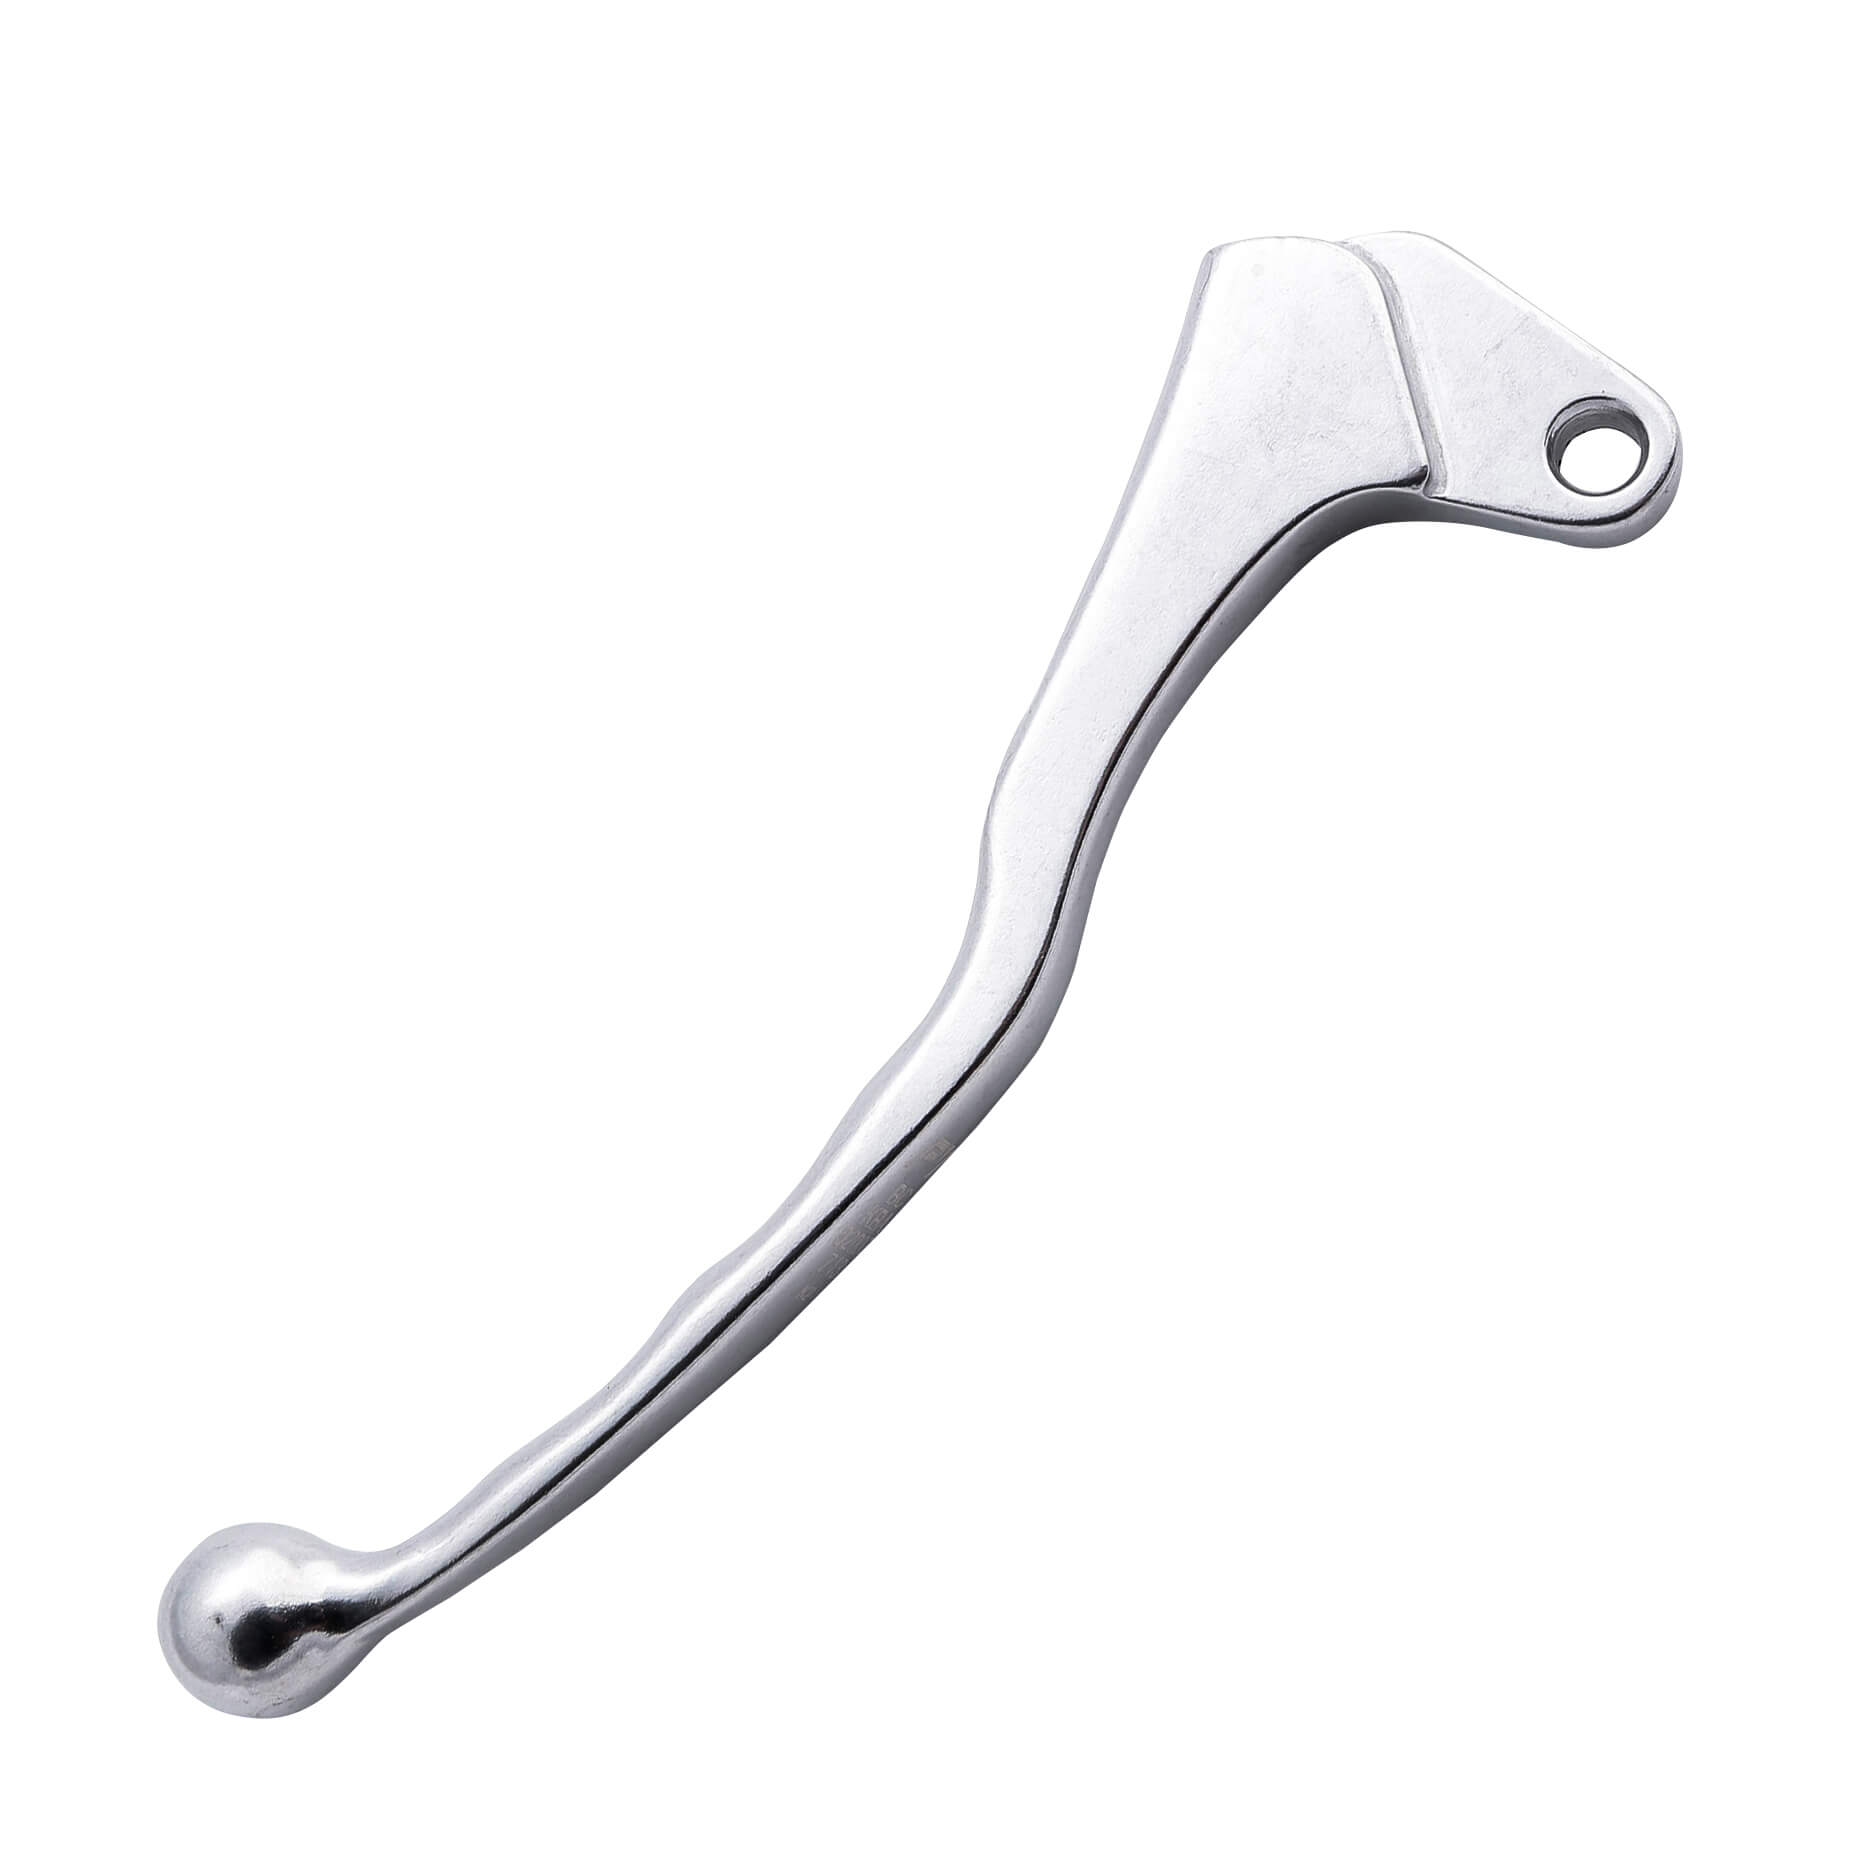 shin_yo Repair clutch lever with ABE, type BC 713, silver